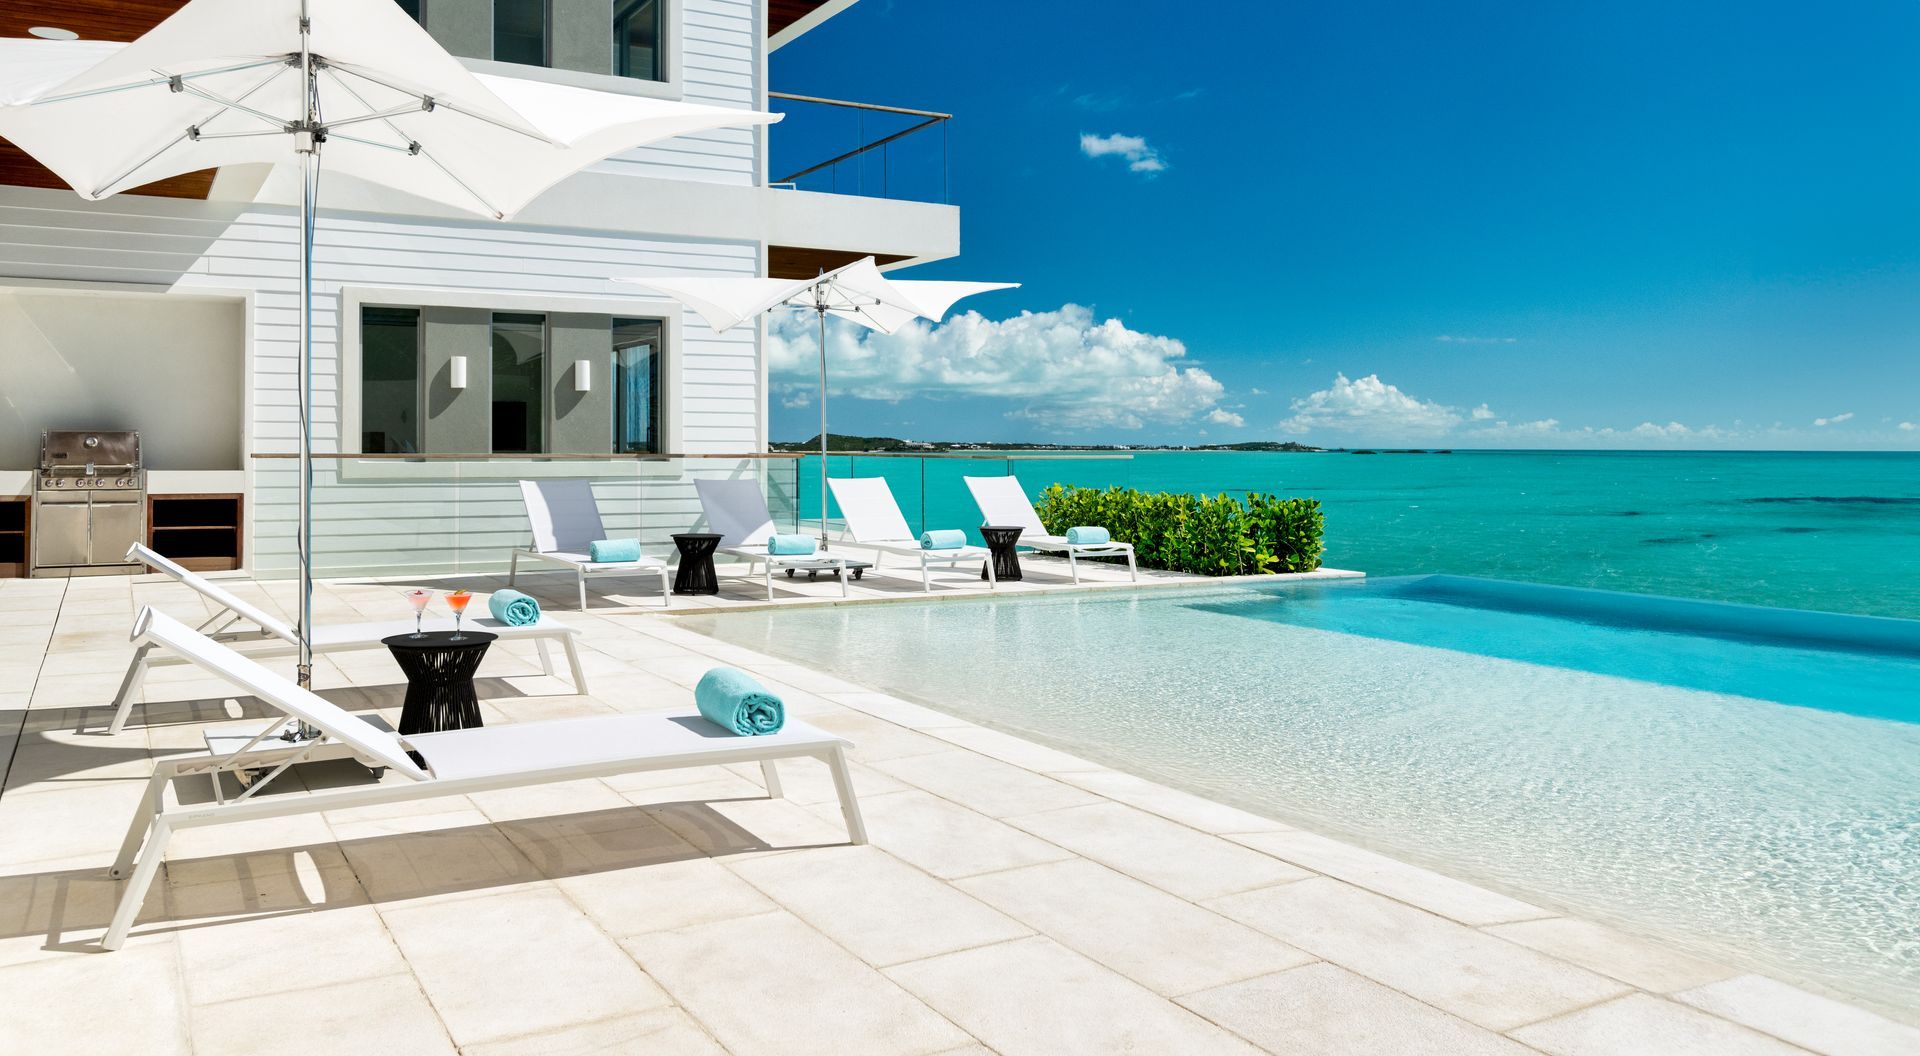 Five Bedroom Amuse Villas With Two Pools + Sun Deck + Water Slide + Beach